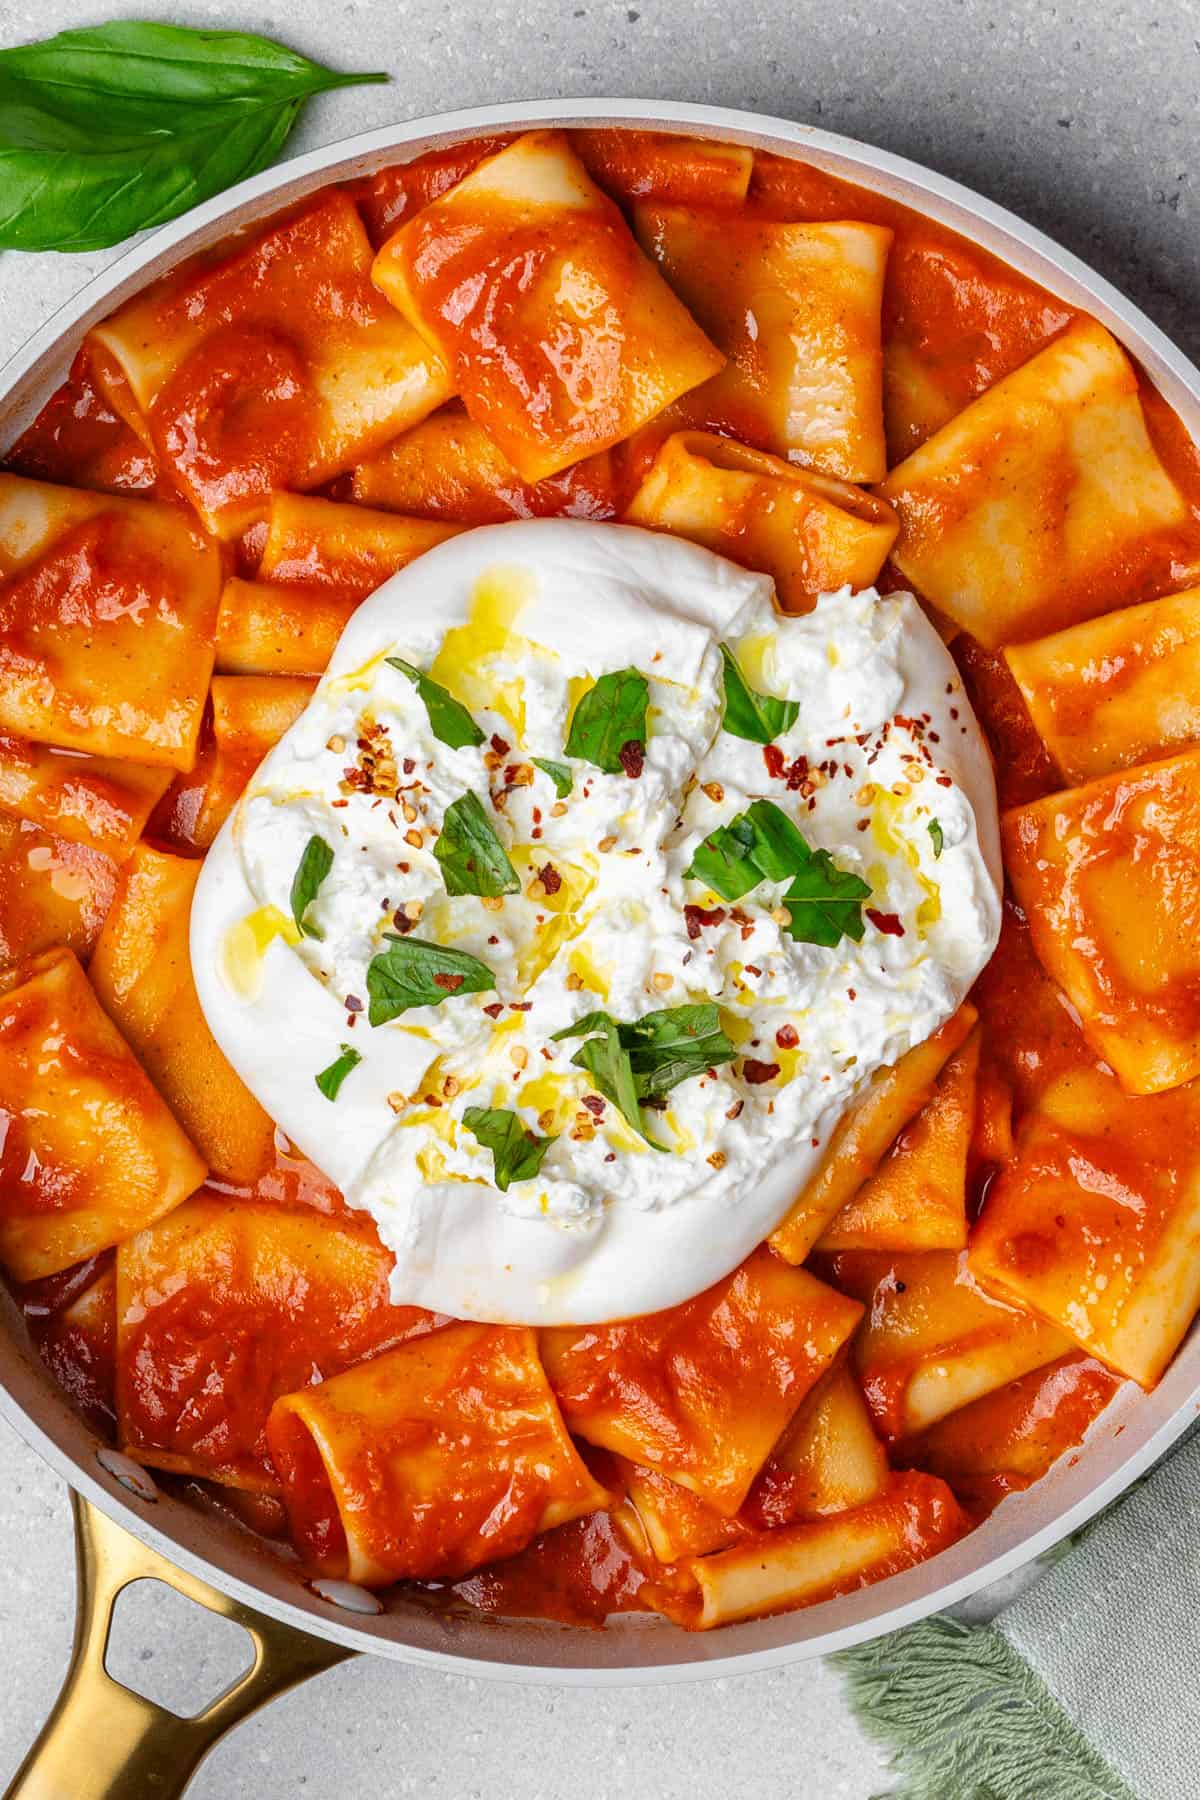 Burrata pasta served with a rich tomato sauce with the burrata cheese on top